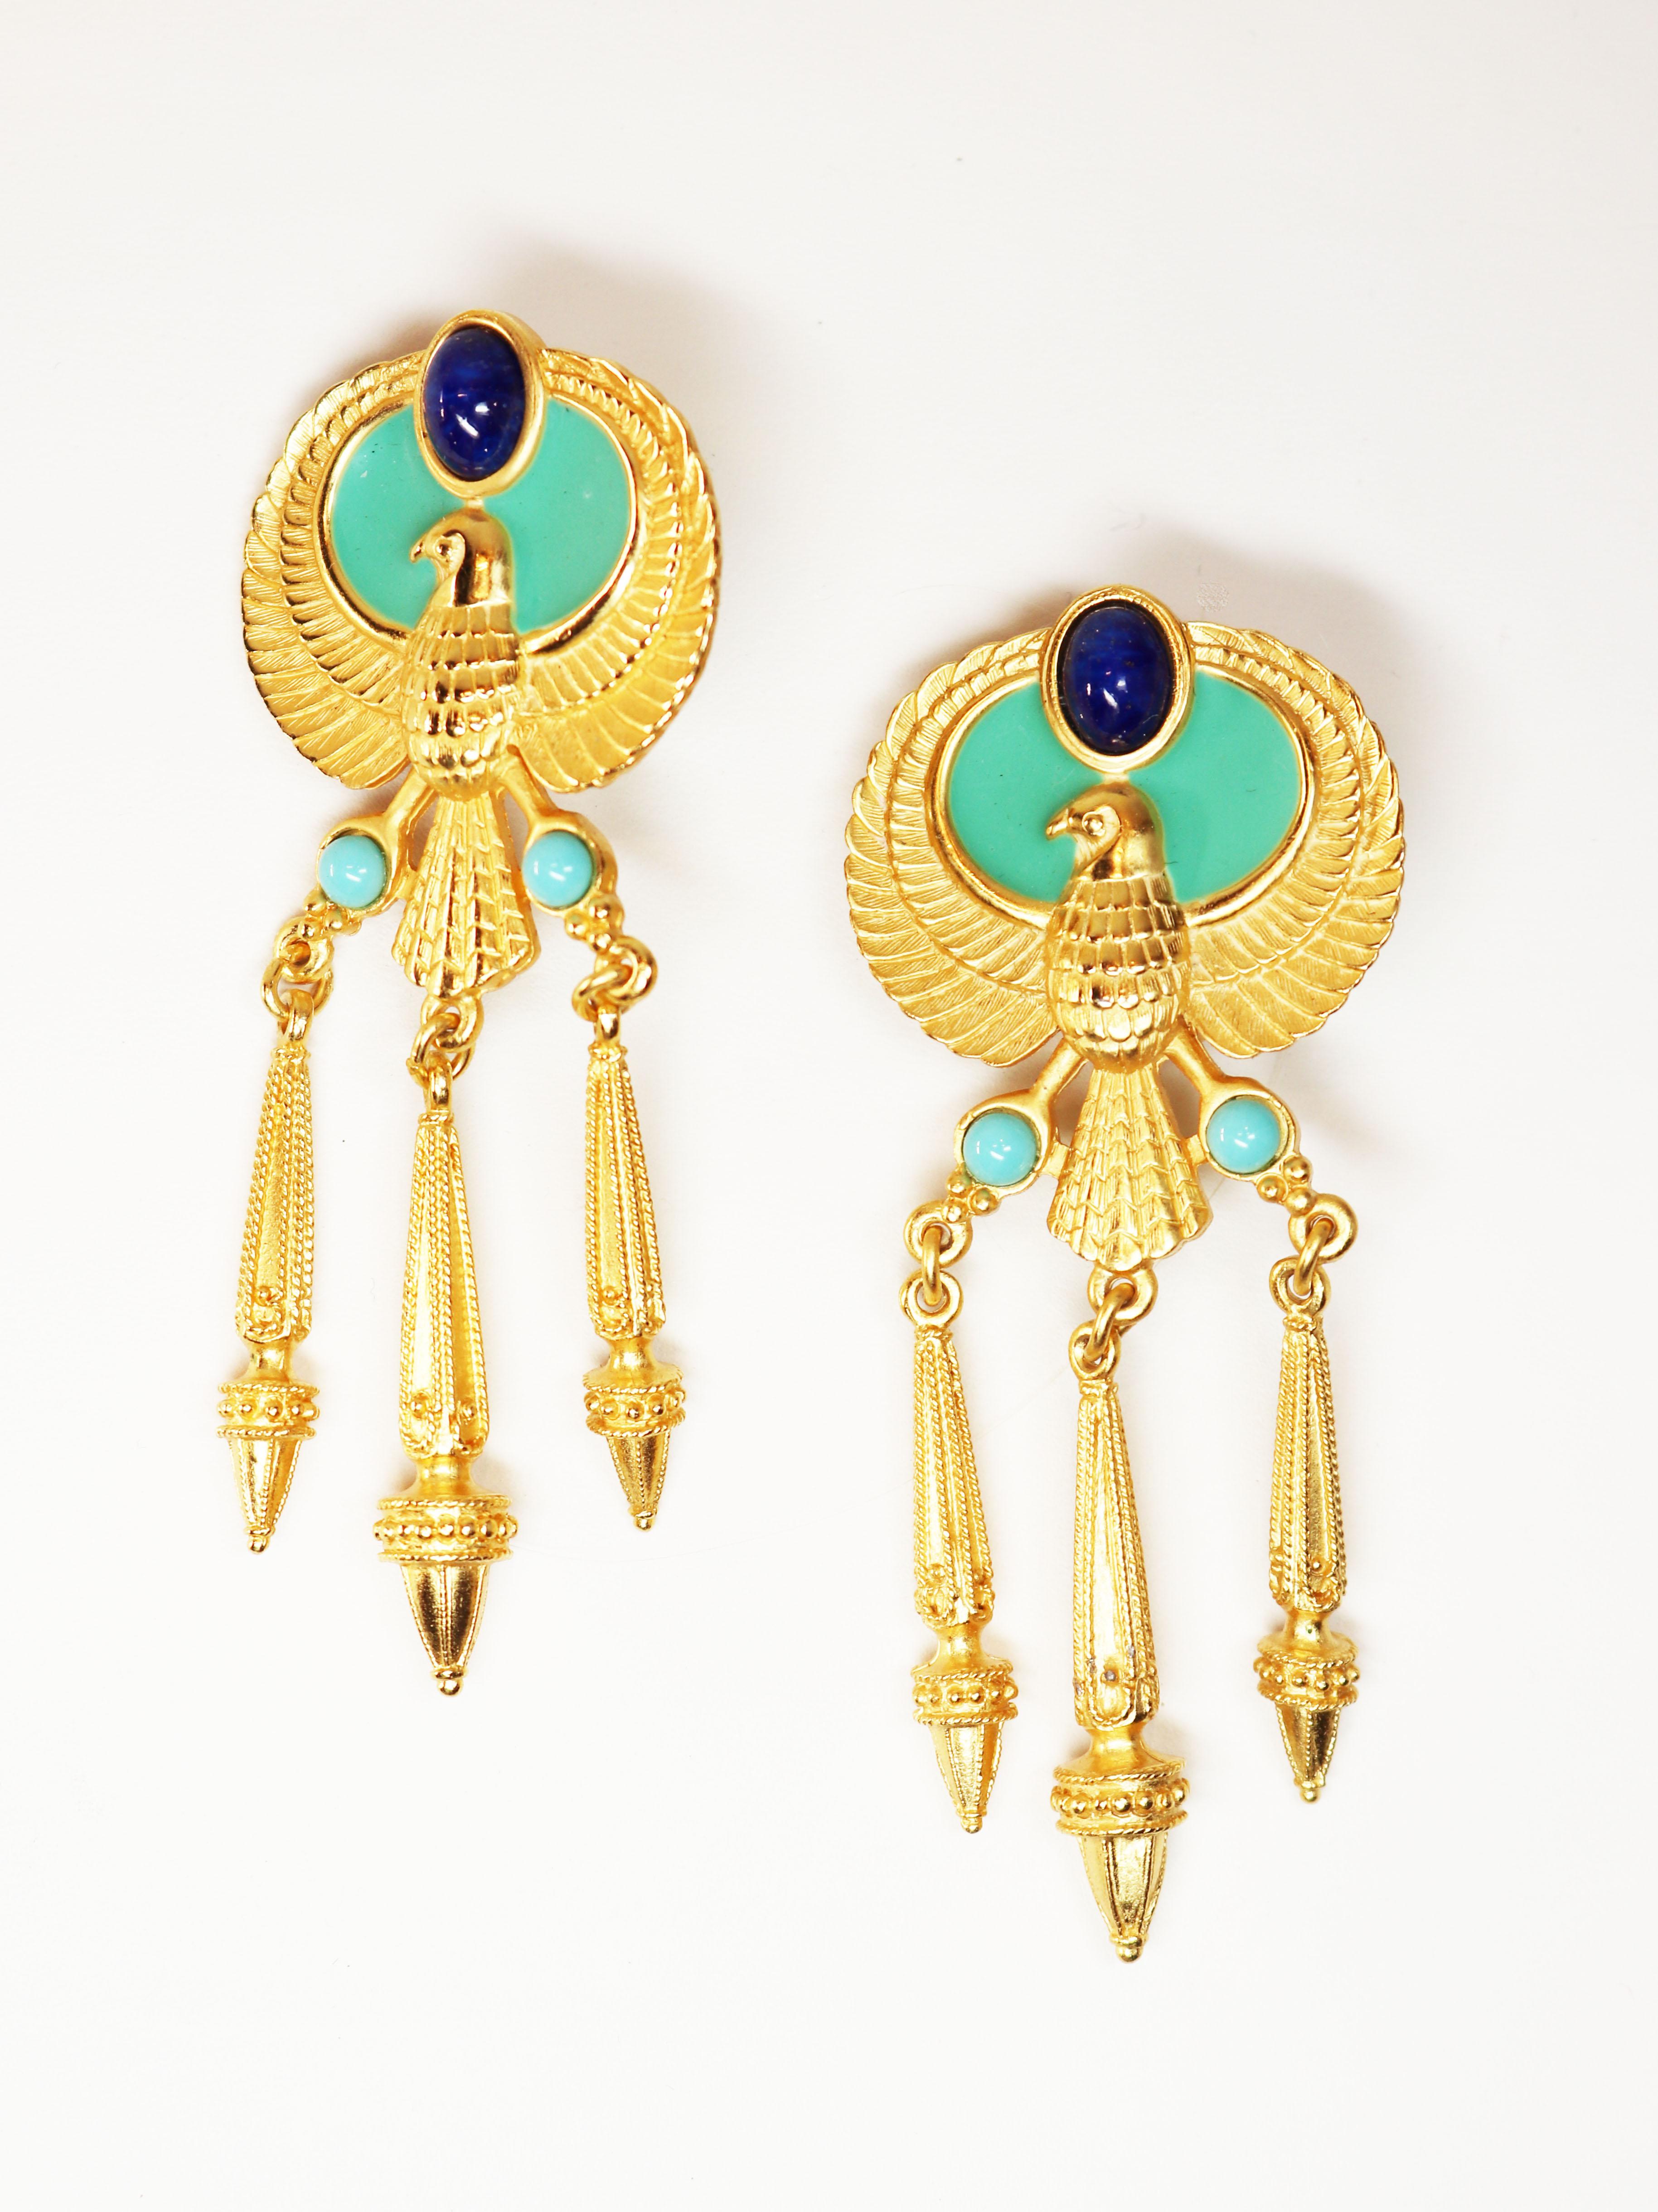 These Elizabeth Taylor “Egyptian Revival” earrings, c. 1993, feature a turquoise base with round, simulated turquoise cabochons and lapis lazuli oval cabochons. Each earring is embellished with three gorgeous, detailed, dangling, geometric drops,